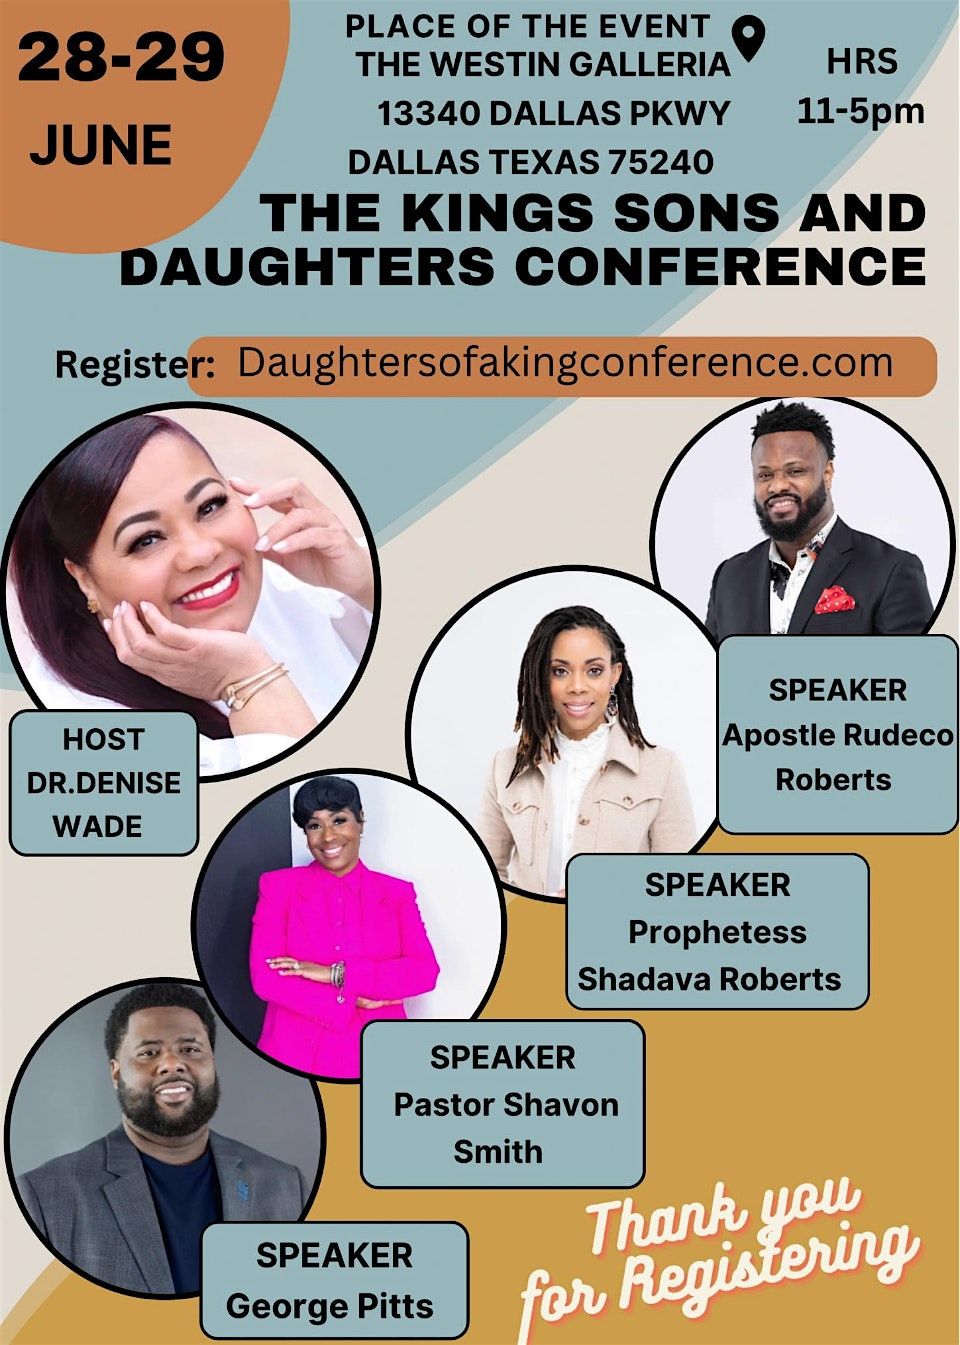 The Kings Sons and Daughters Event